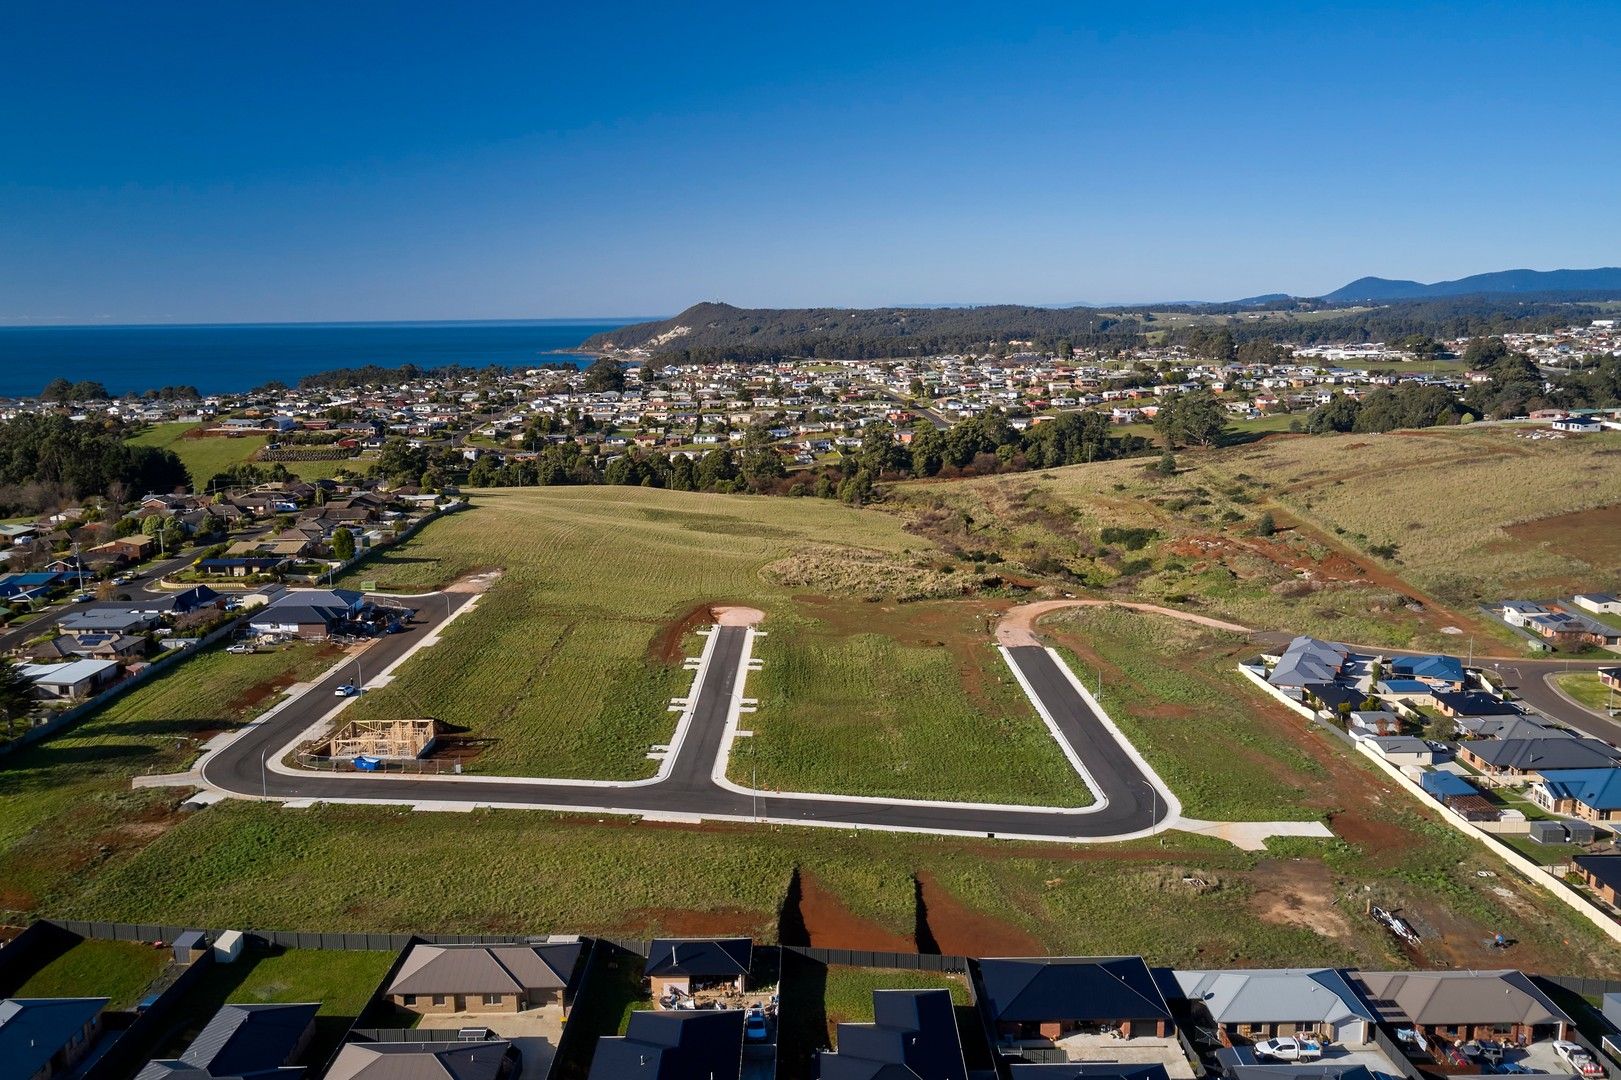 Lot 21 of 601 Loongana Avenue, Shorewell Park TAS 7320, Image 2